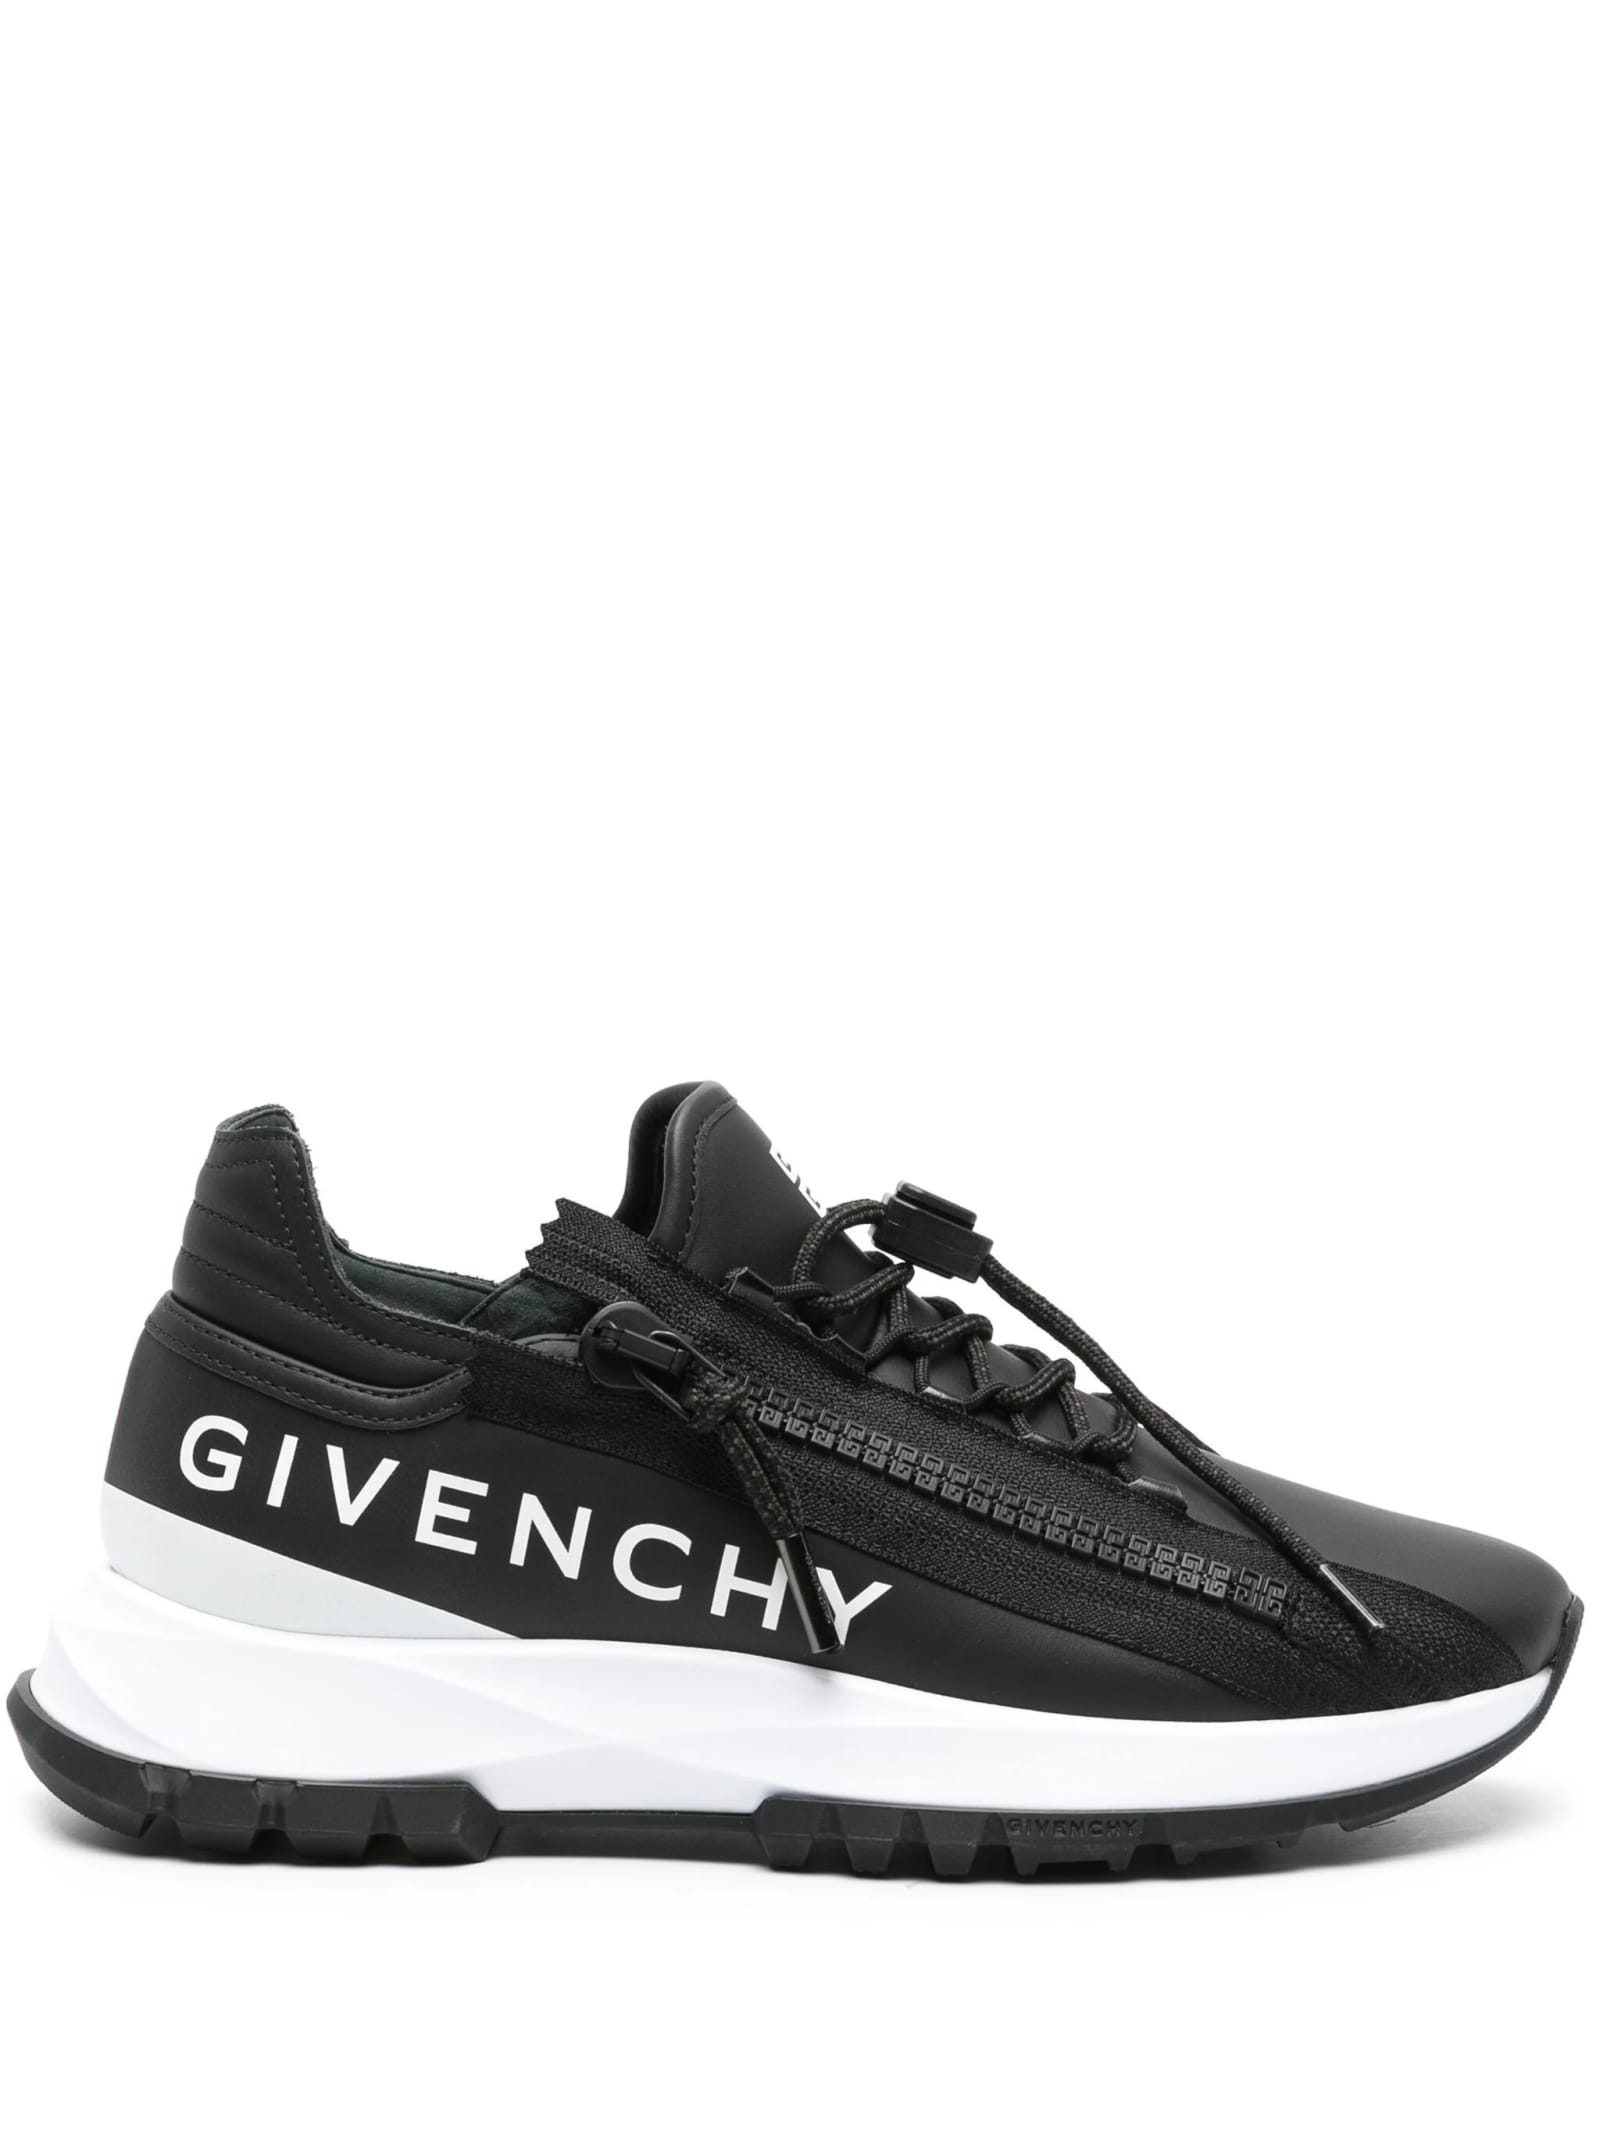 GIVENCHY SPECTER RUNNING SNEAKERS IN BLACK LEATHER WITH ZIP